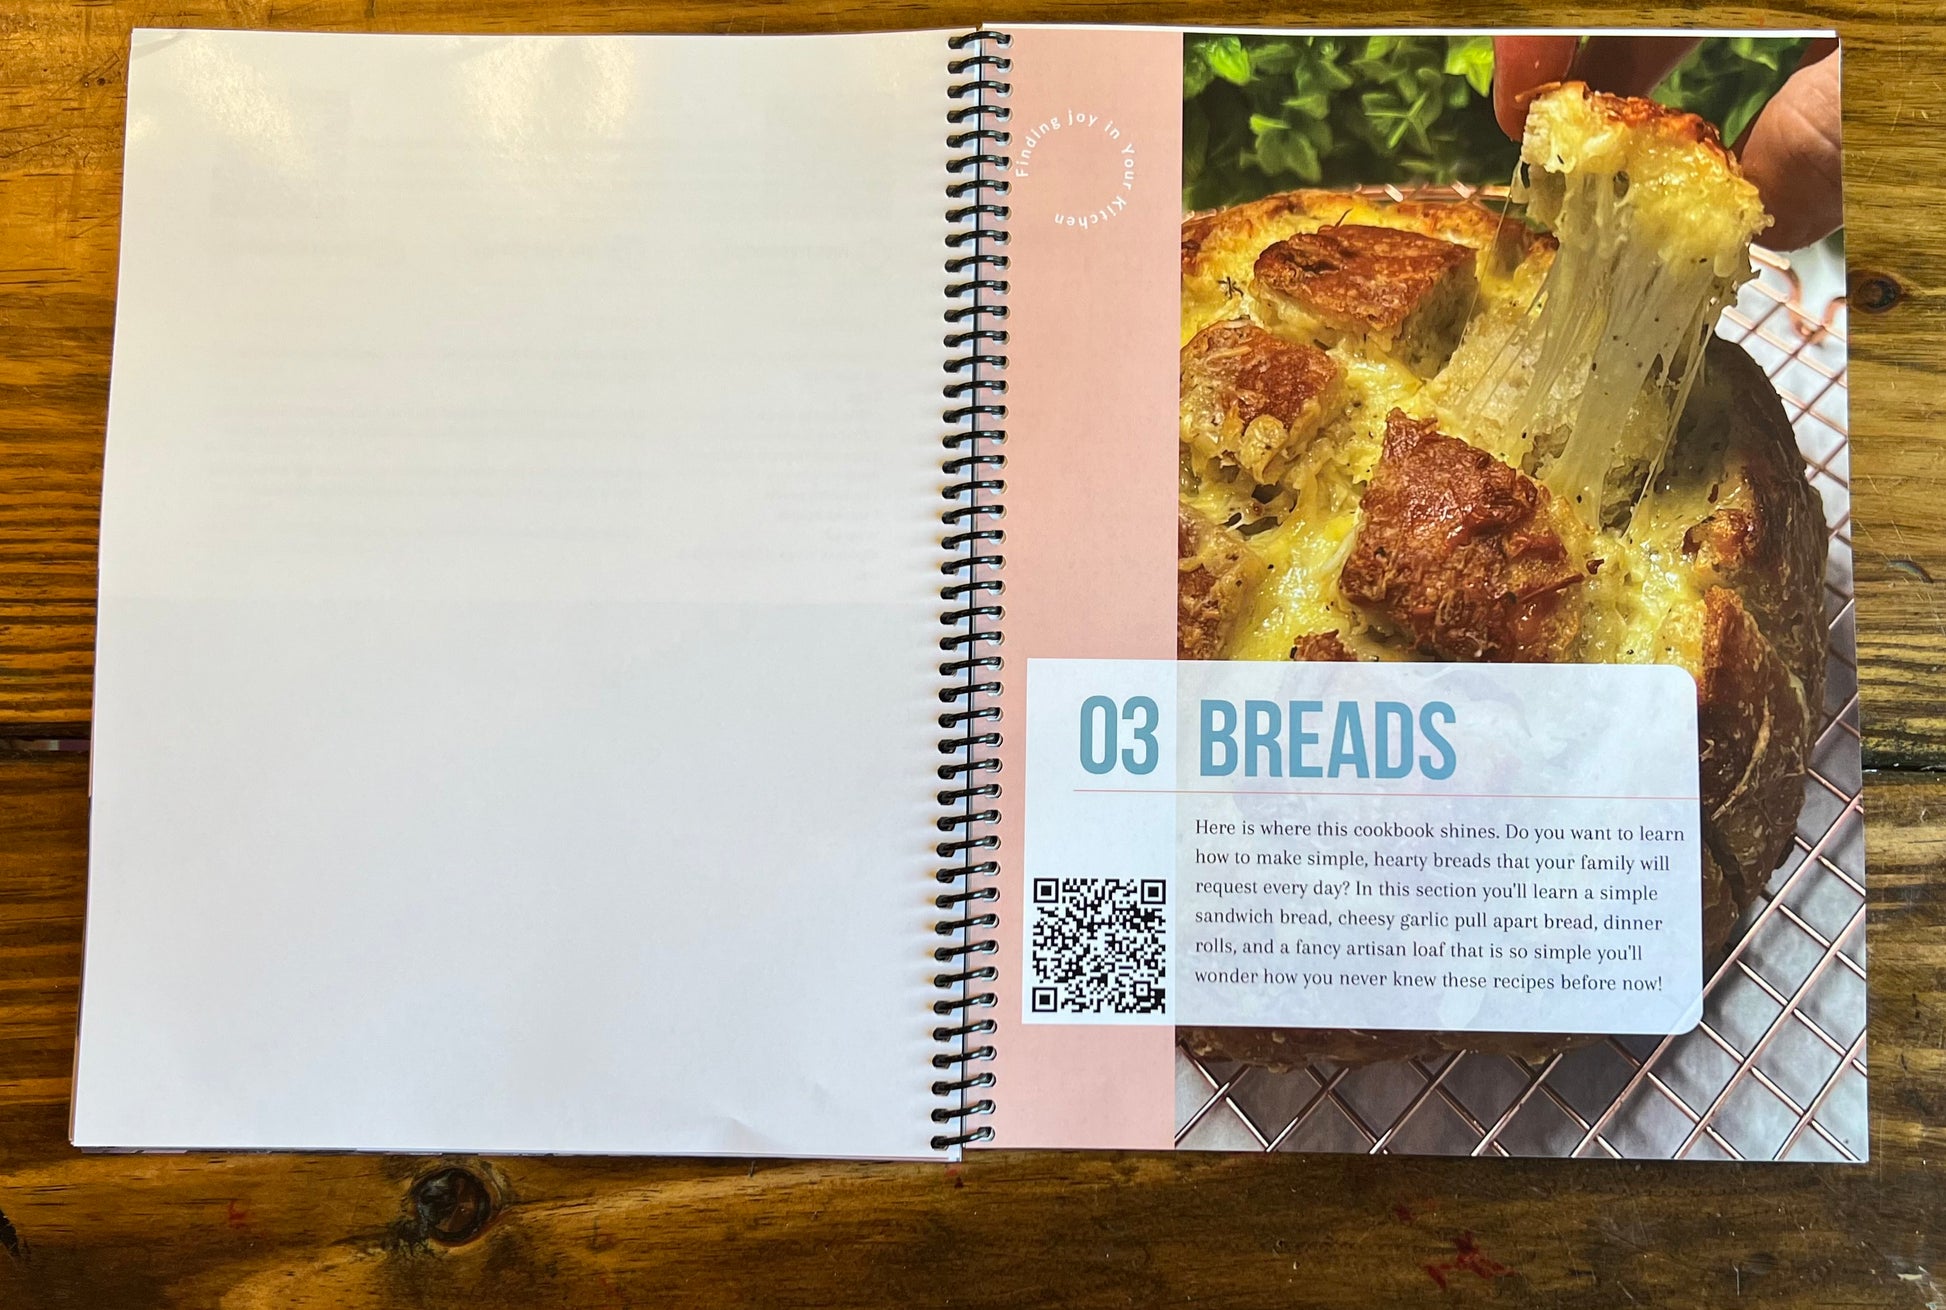 COOKBOOK FOR EVERYTHING YOU WANT TO MAKE